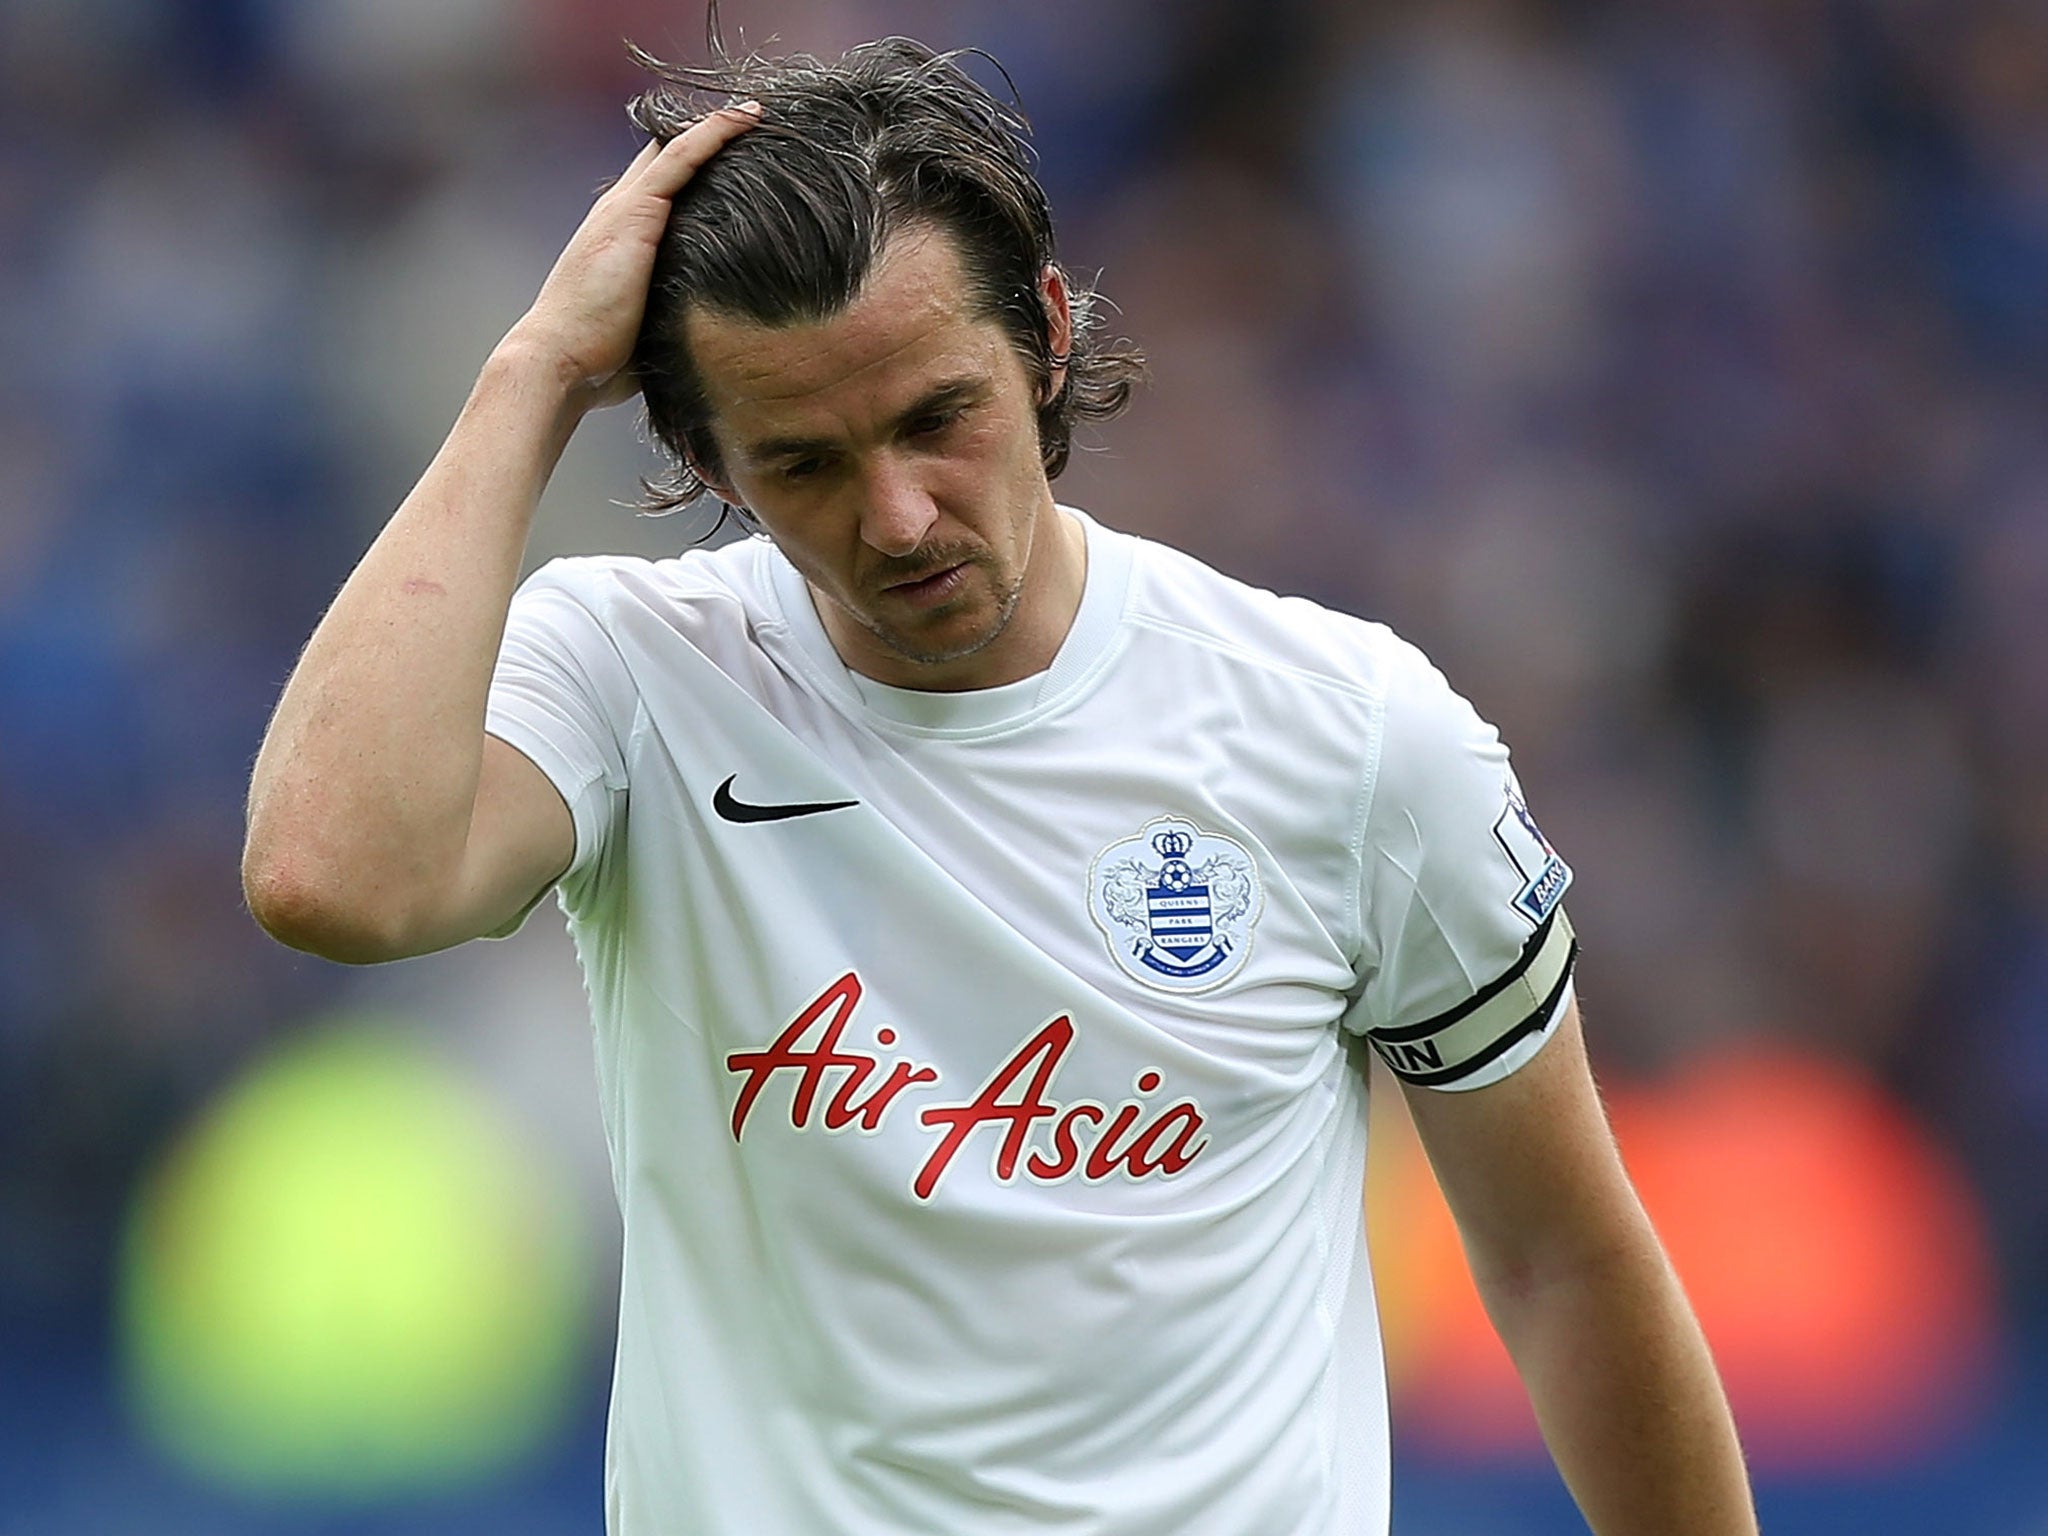 Joey Barton has joined Burnley on a one-year deal